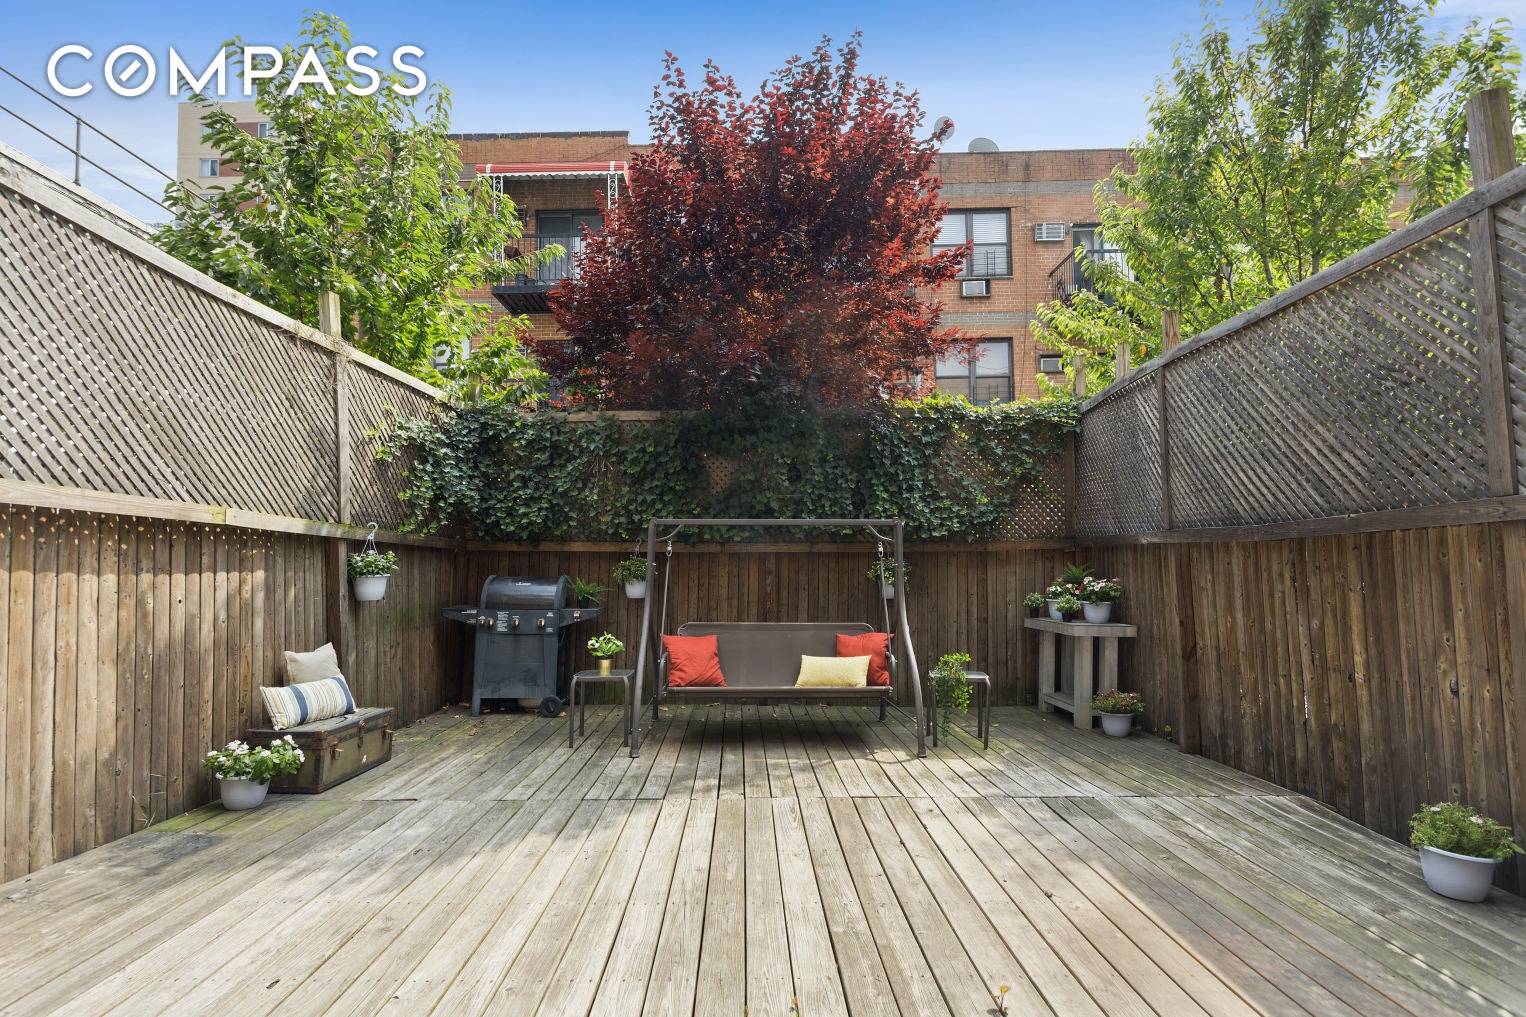 Spacious and bright, this well proportioned two bedroom, 1 bath, with private parking available, is the perfect opportunity to experience the best of Brooklyn.